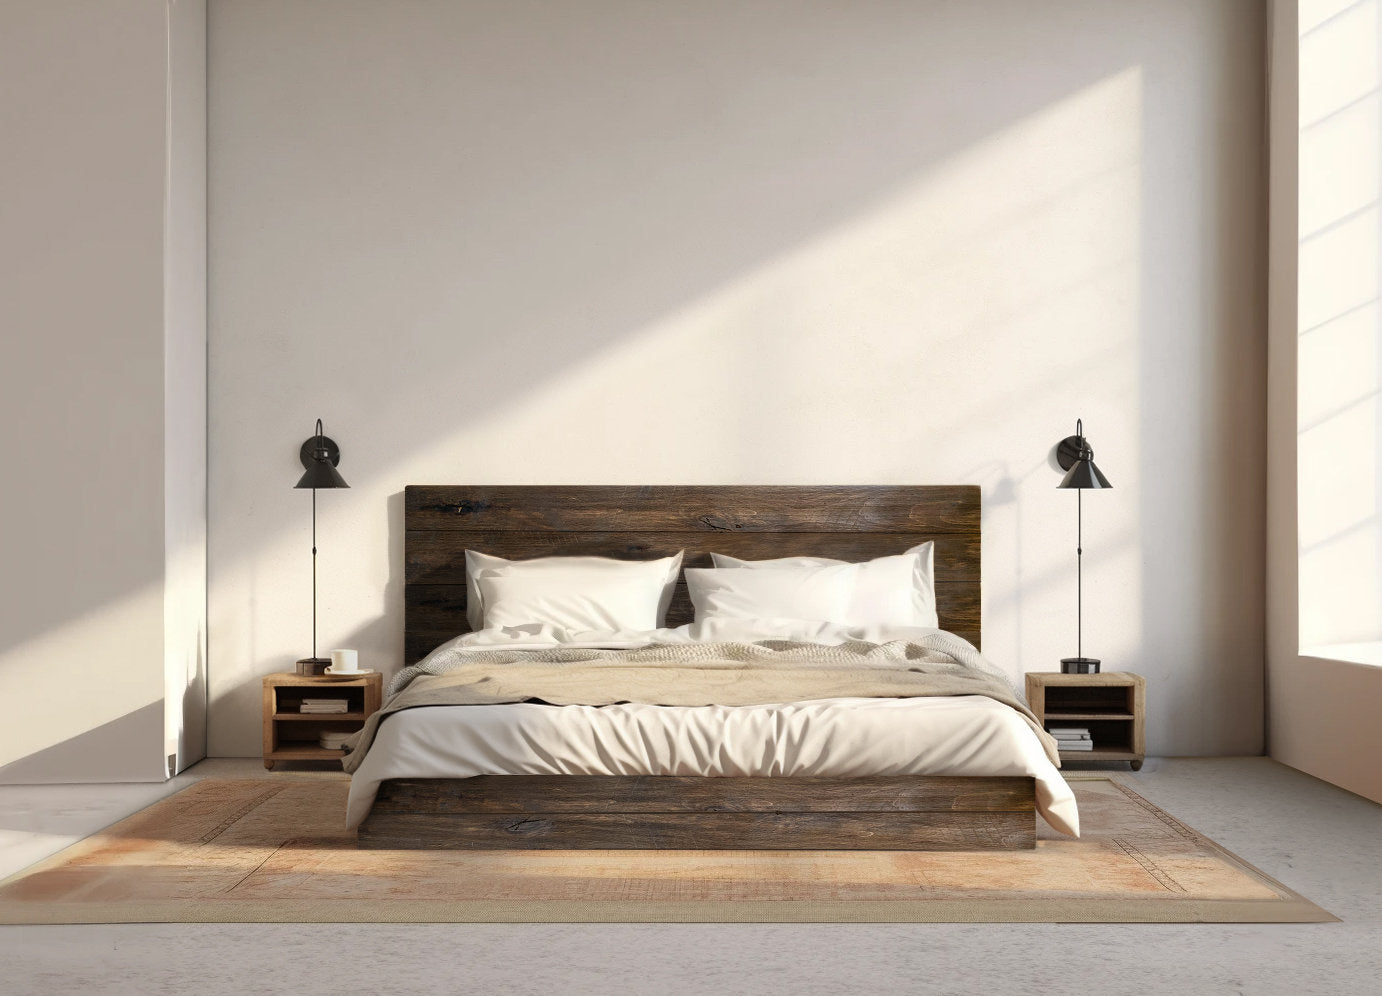 The River Bed - Quick Ship - Barnwood Reclaimed Aesthetic - Modern Rustic - Solid Wood - Platform Bed Frame & Headboard - Handmade in USA